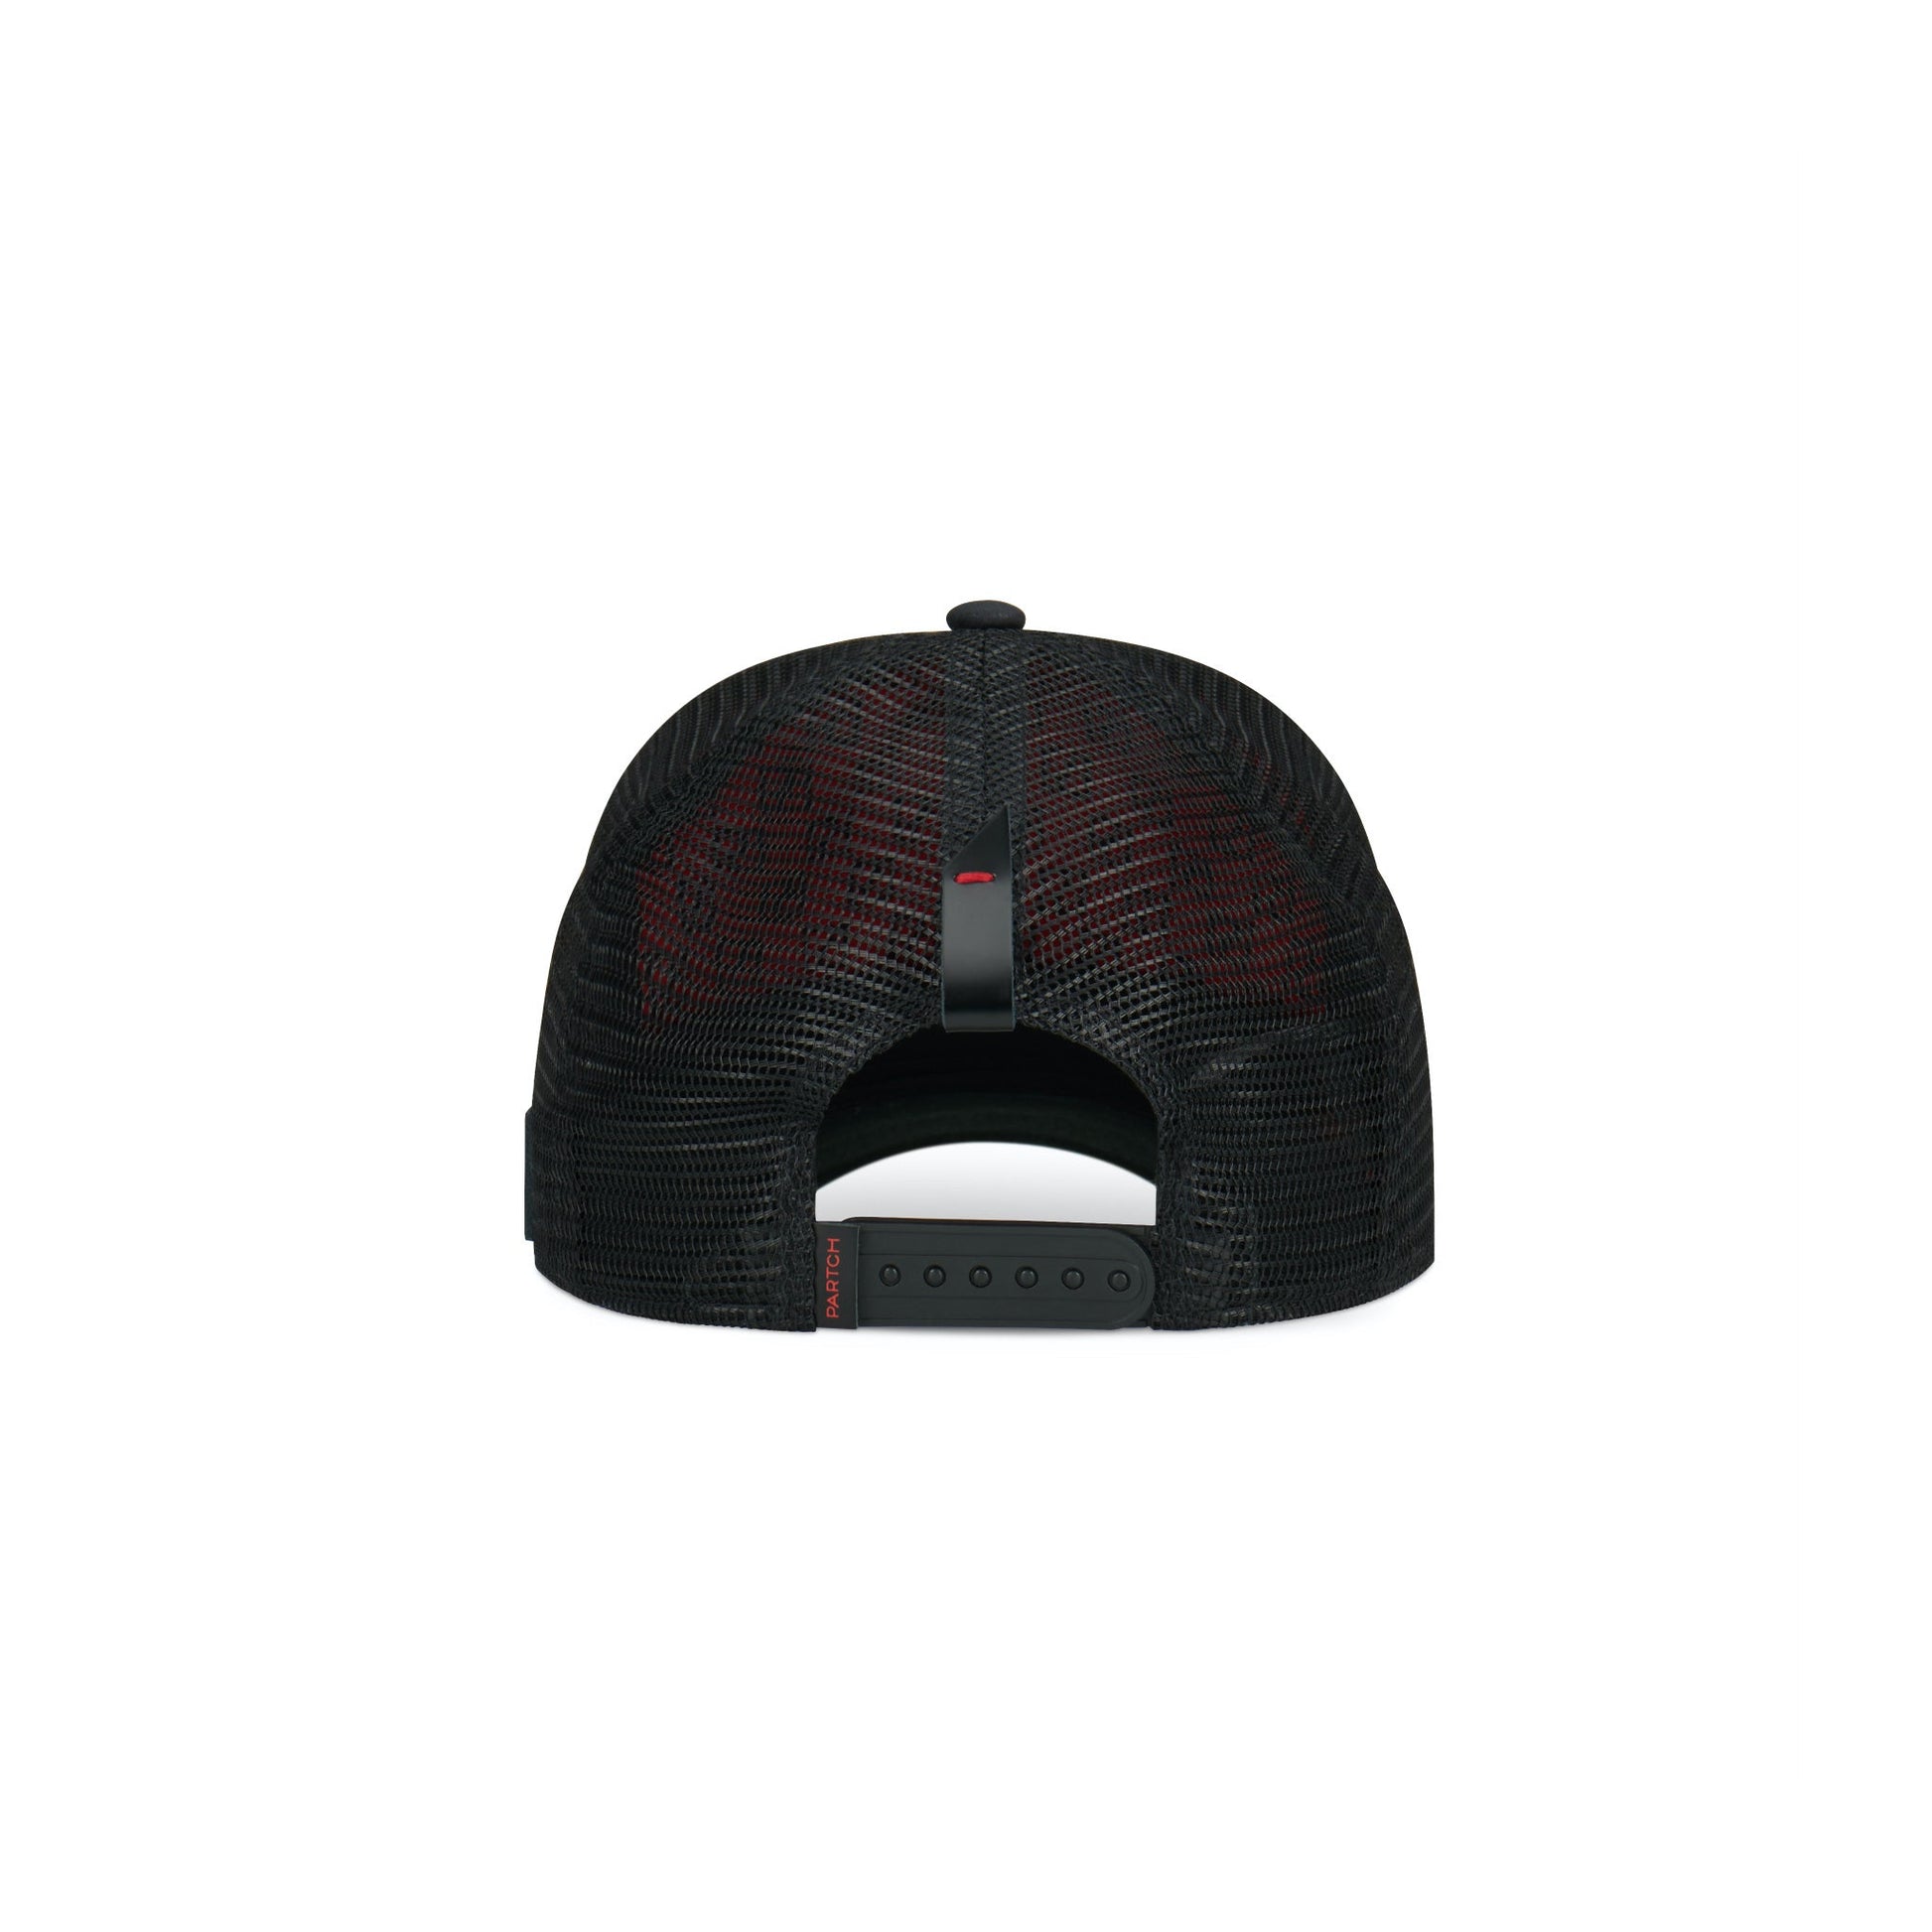 Partch Trucker Hat Black with PARTCH-Clip DWYL-B77 Back View